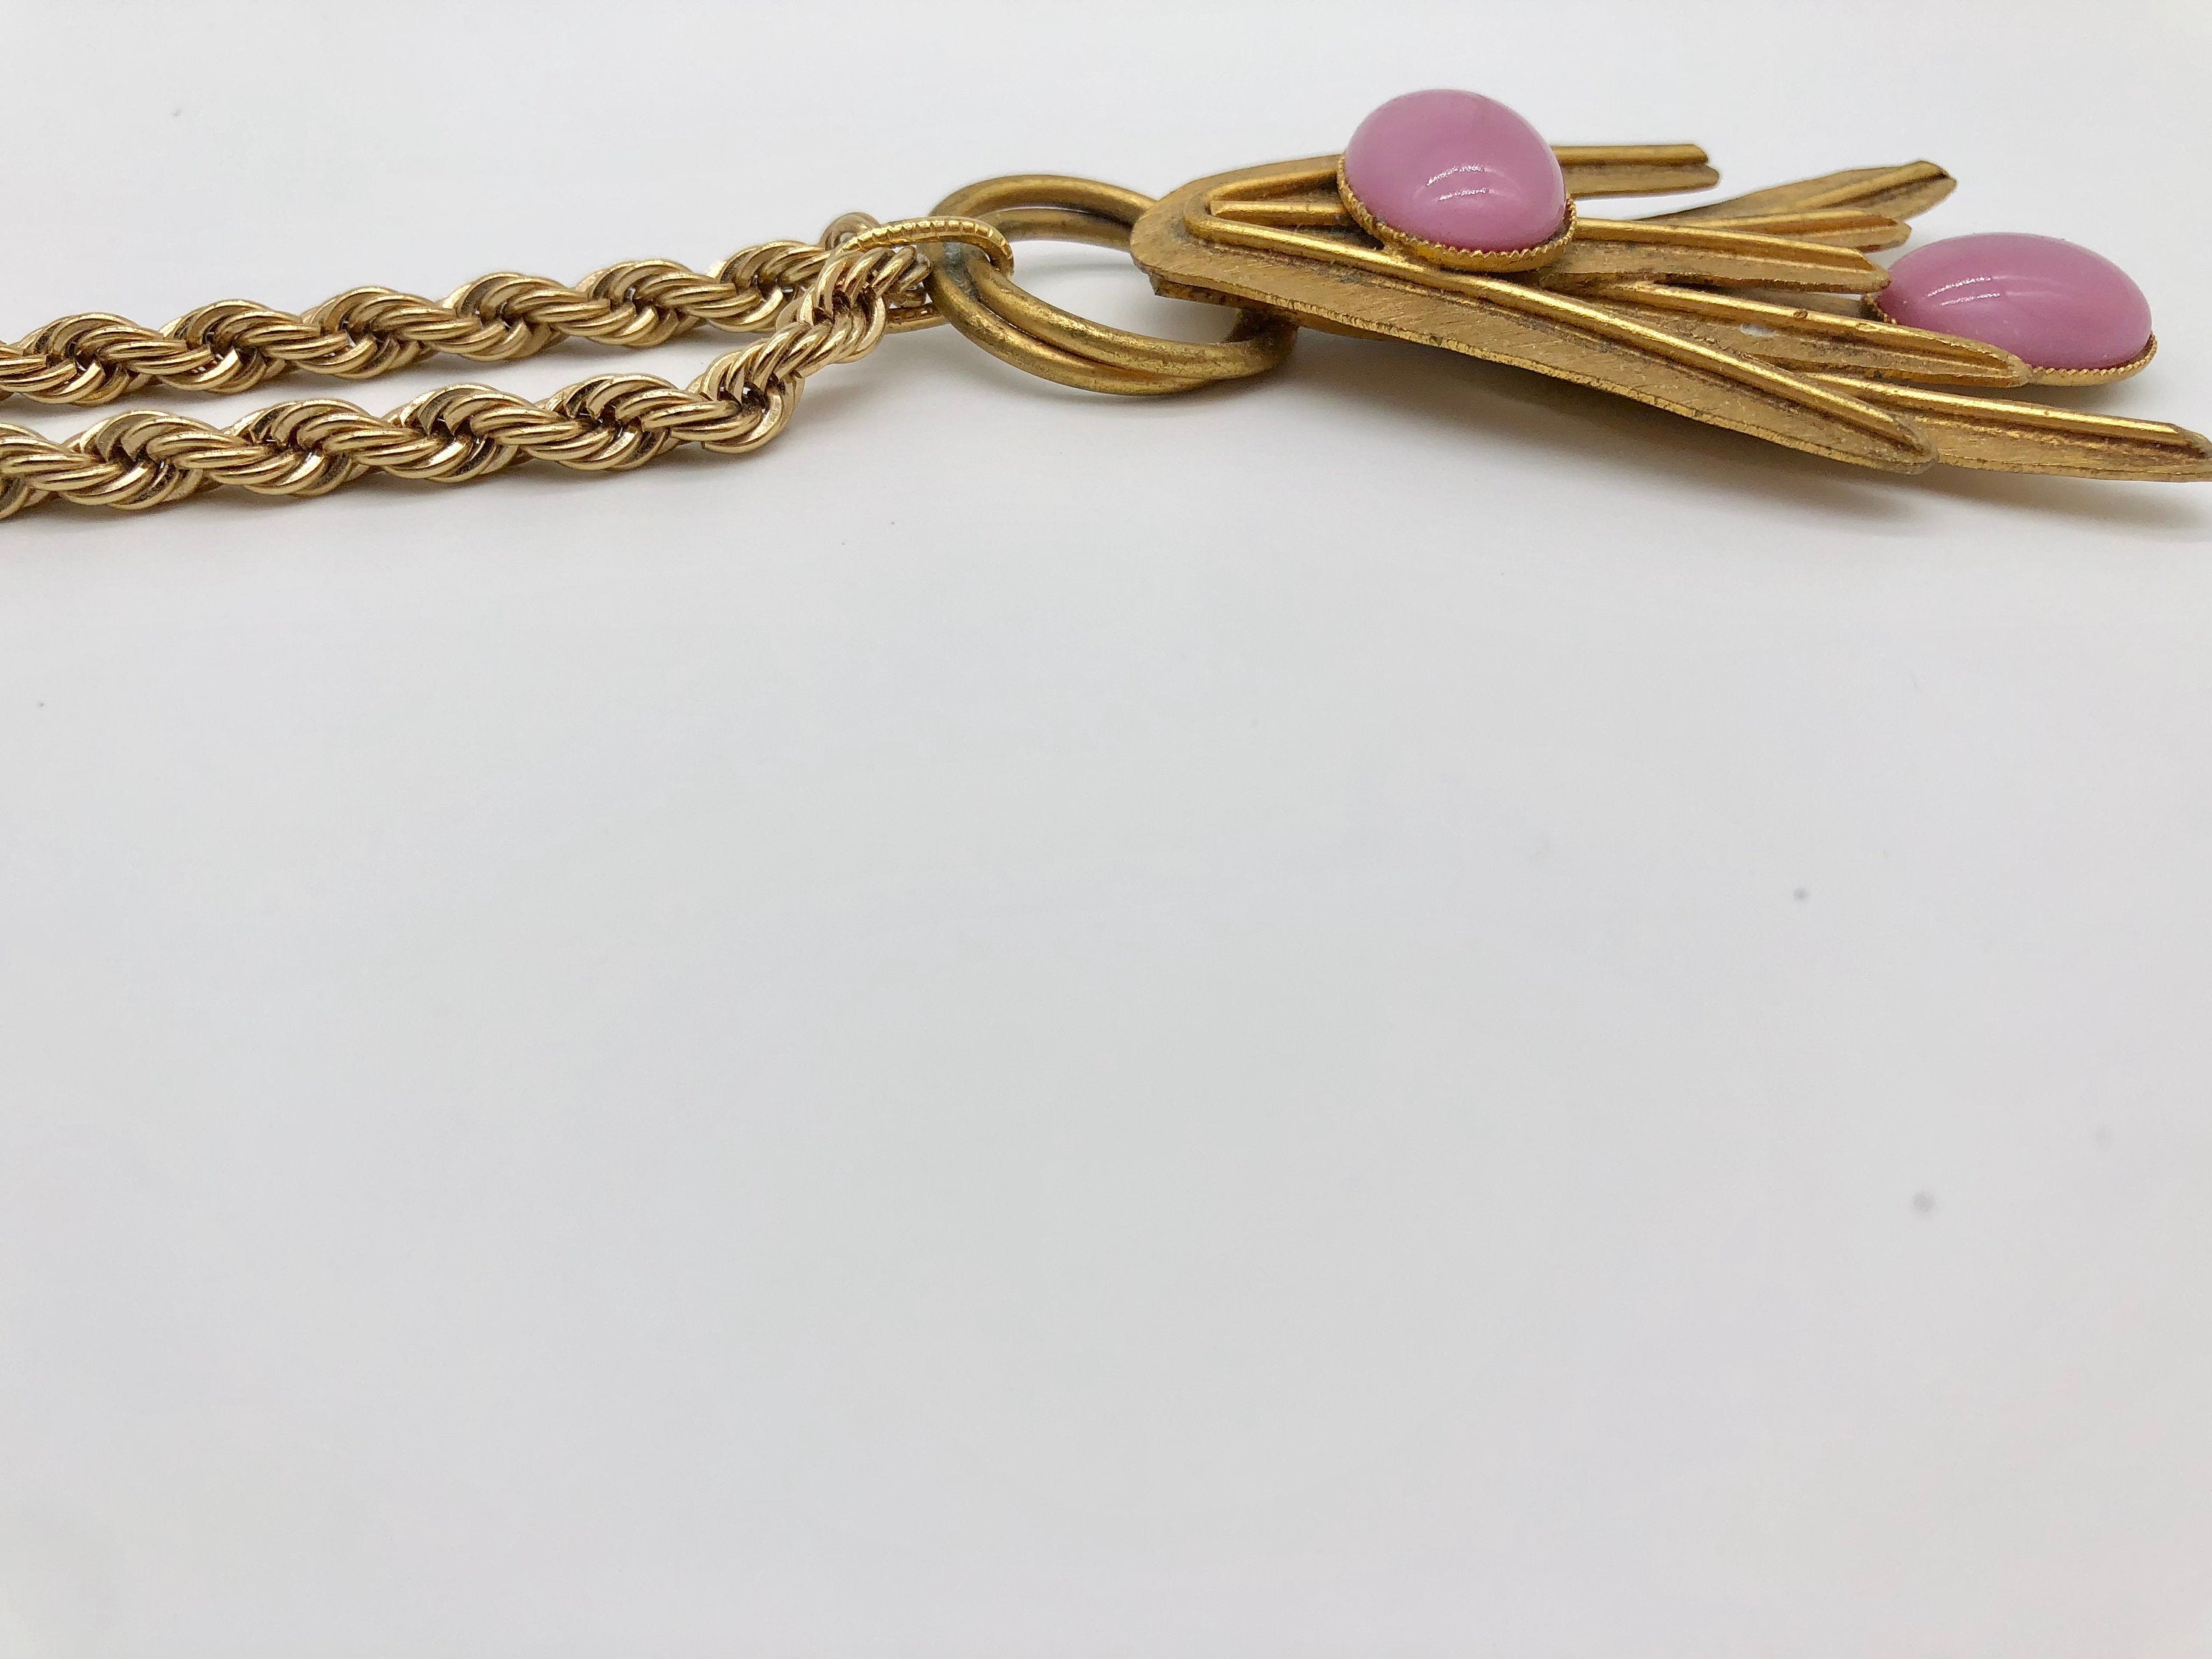 Gold Tone Silvana Italy Designer 1960S Pendant Pink Cabochon Gold Leaves Necklace